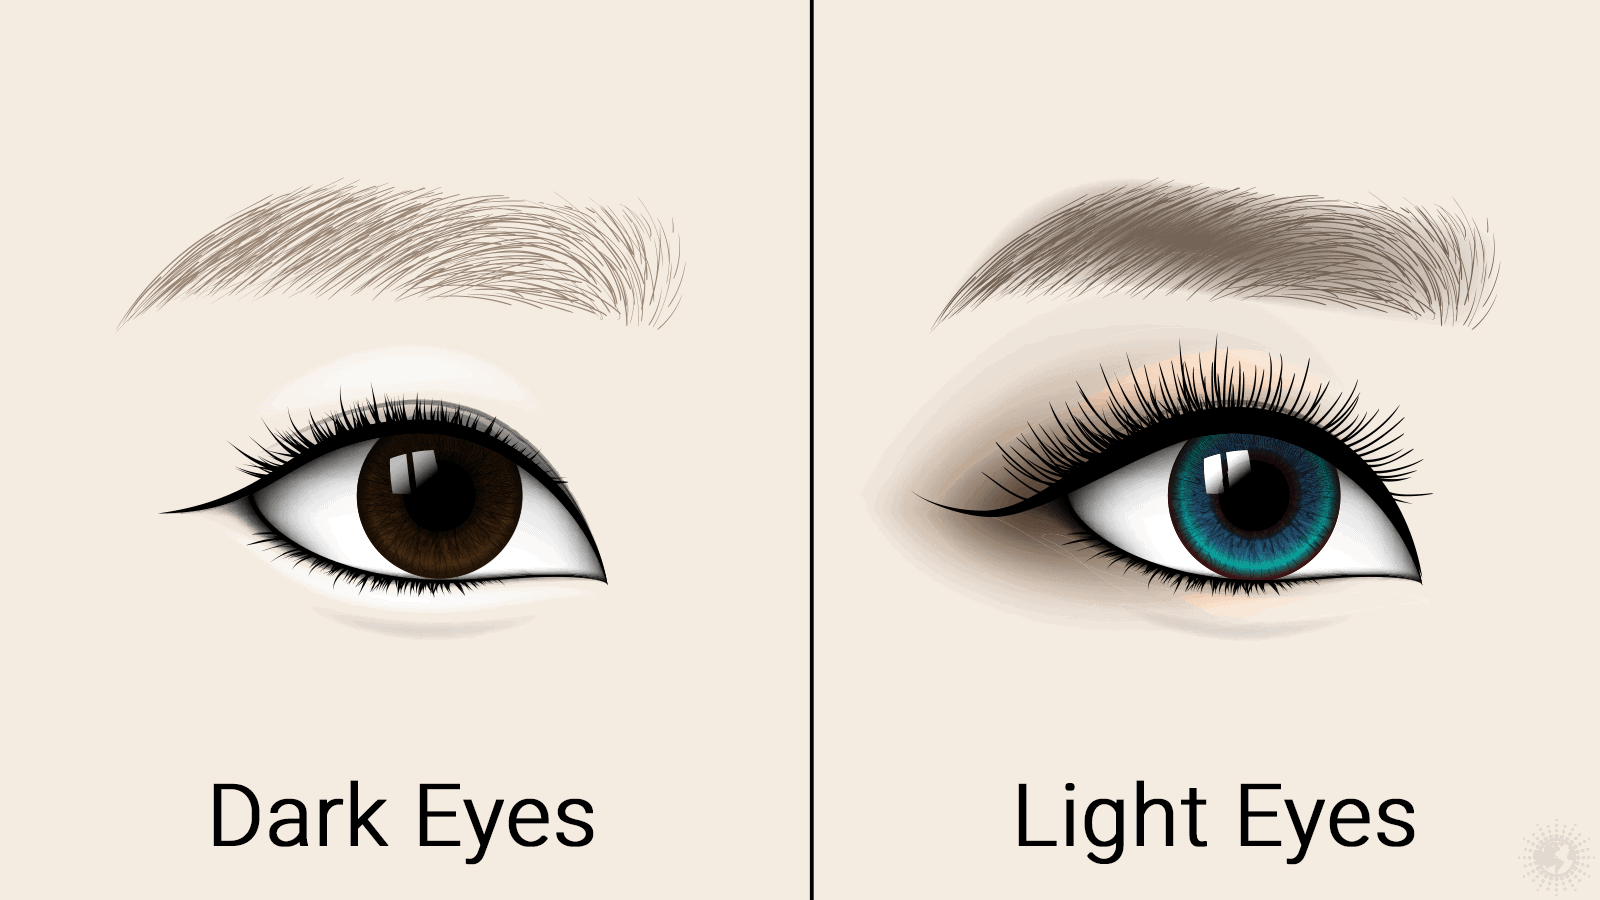 Researchers Explain What Your Eye Color Says About Your Personality